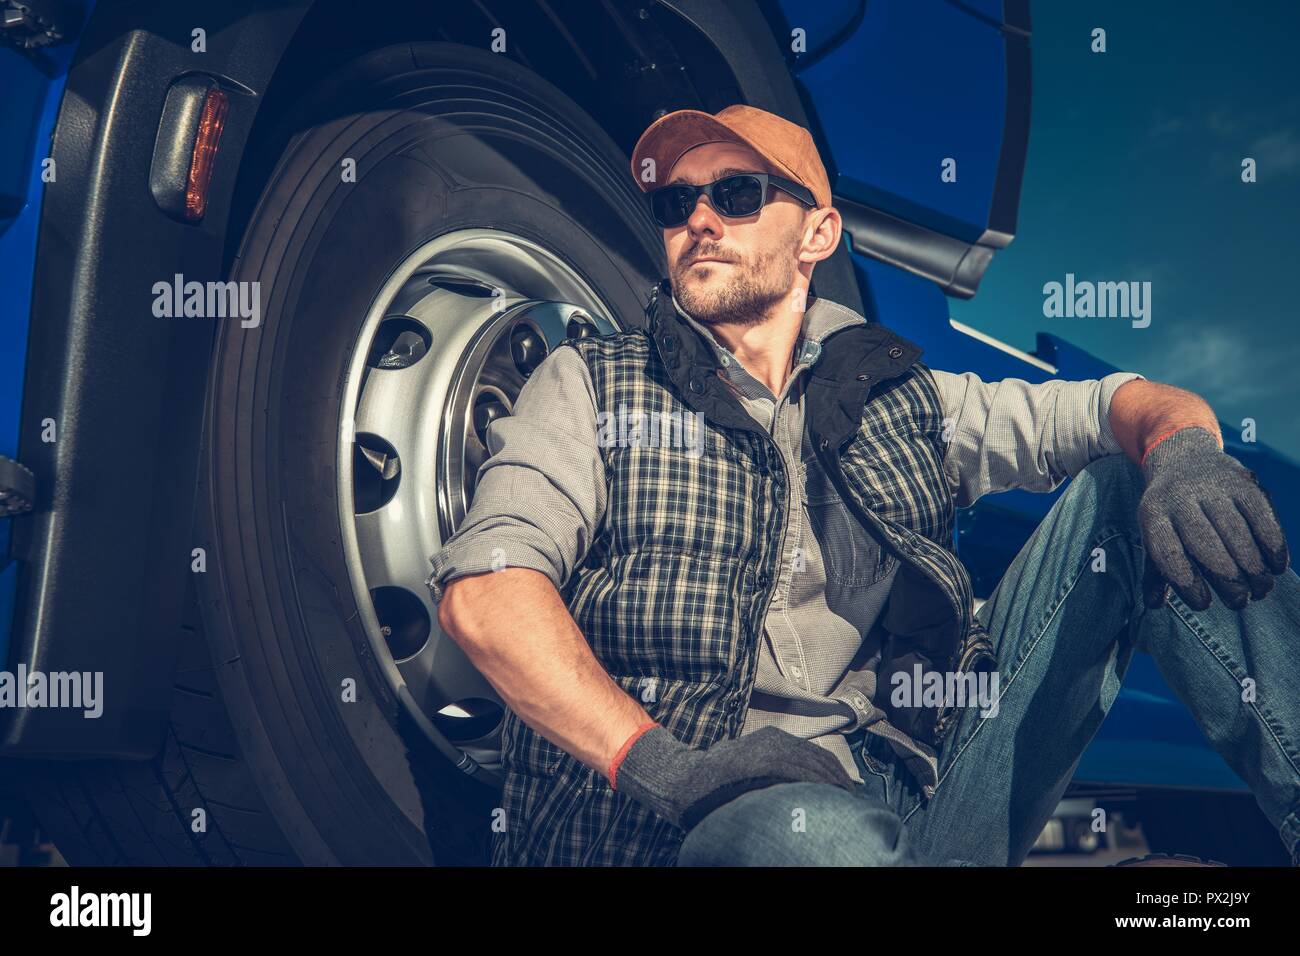 Relaxed Caucasian Truck Driver Seating on the Ground and Support His Back on the Semi Truck Wheel. Stock Photo